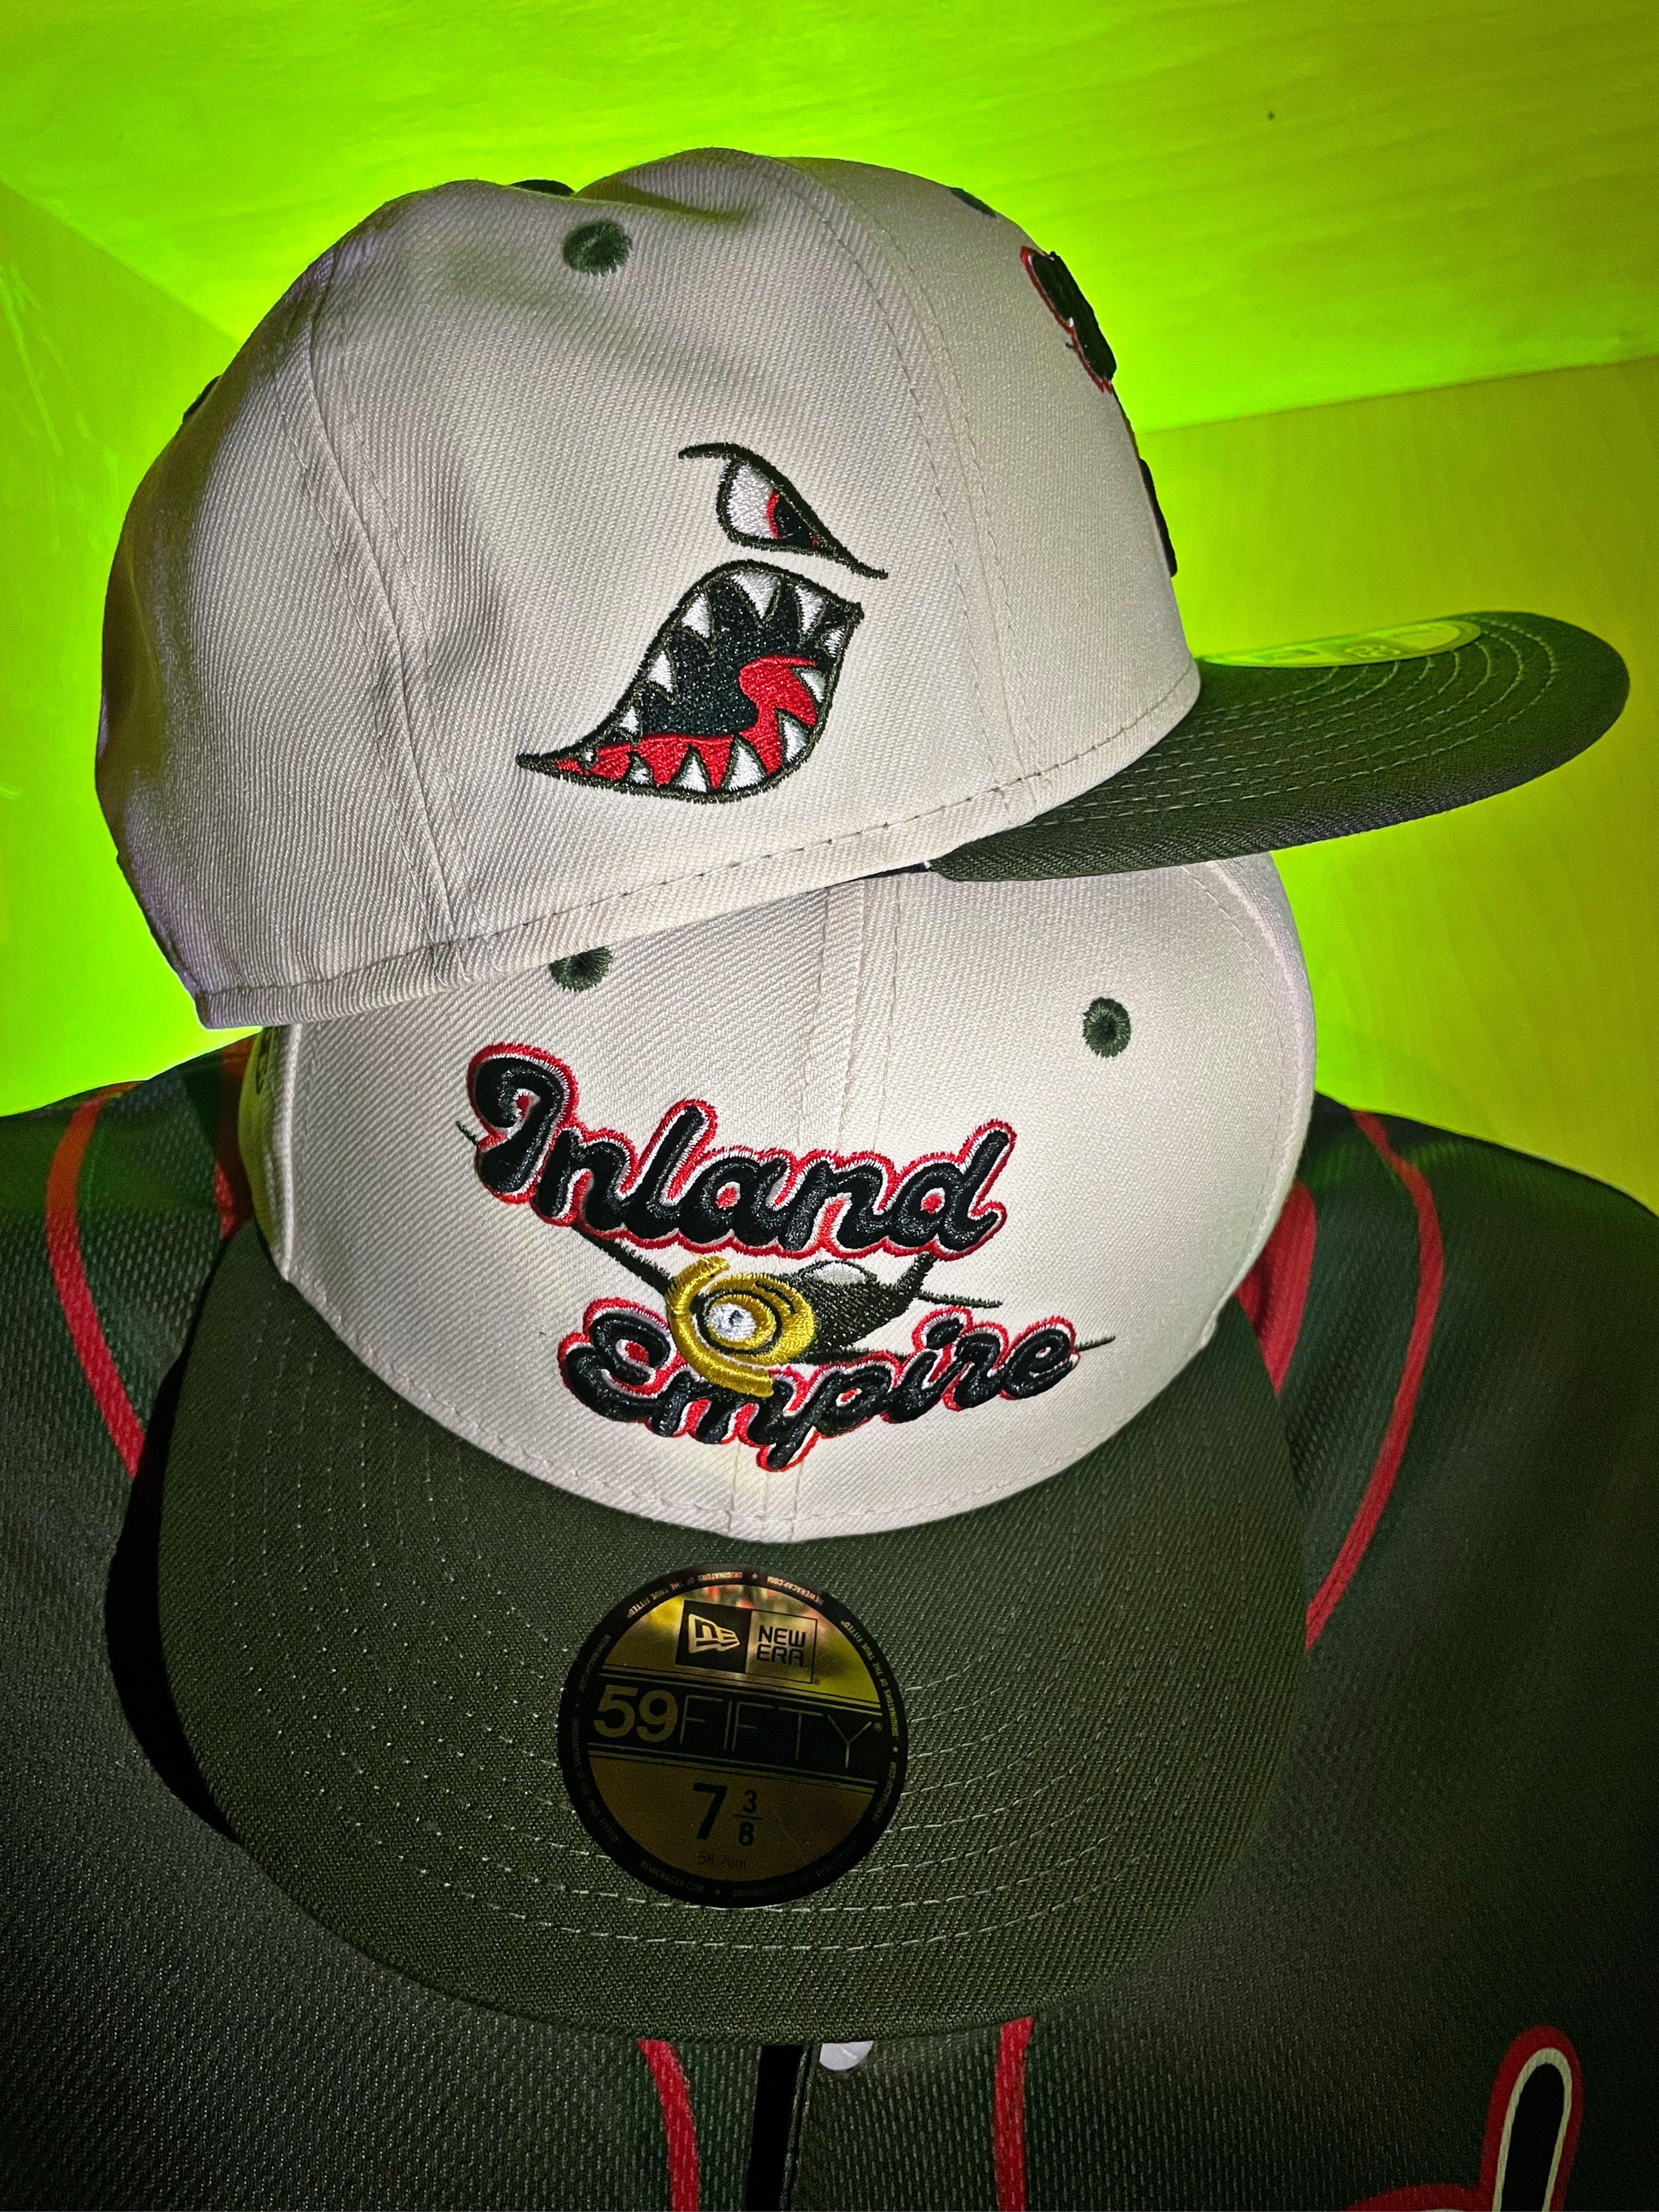 Inland Empire 66ers on Instagram: Our Fourth of July Hats are now on sale!  🇺🇸🎆 Link in bio to purchase yours!